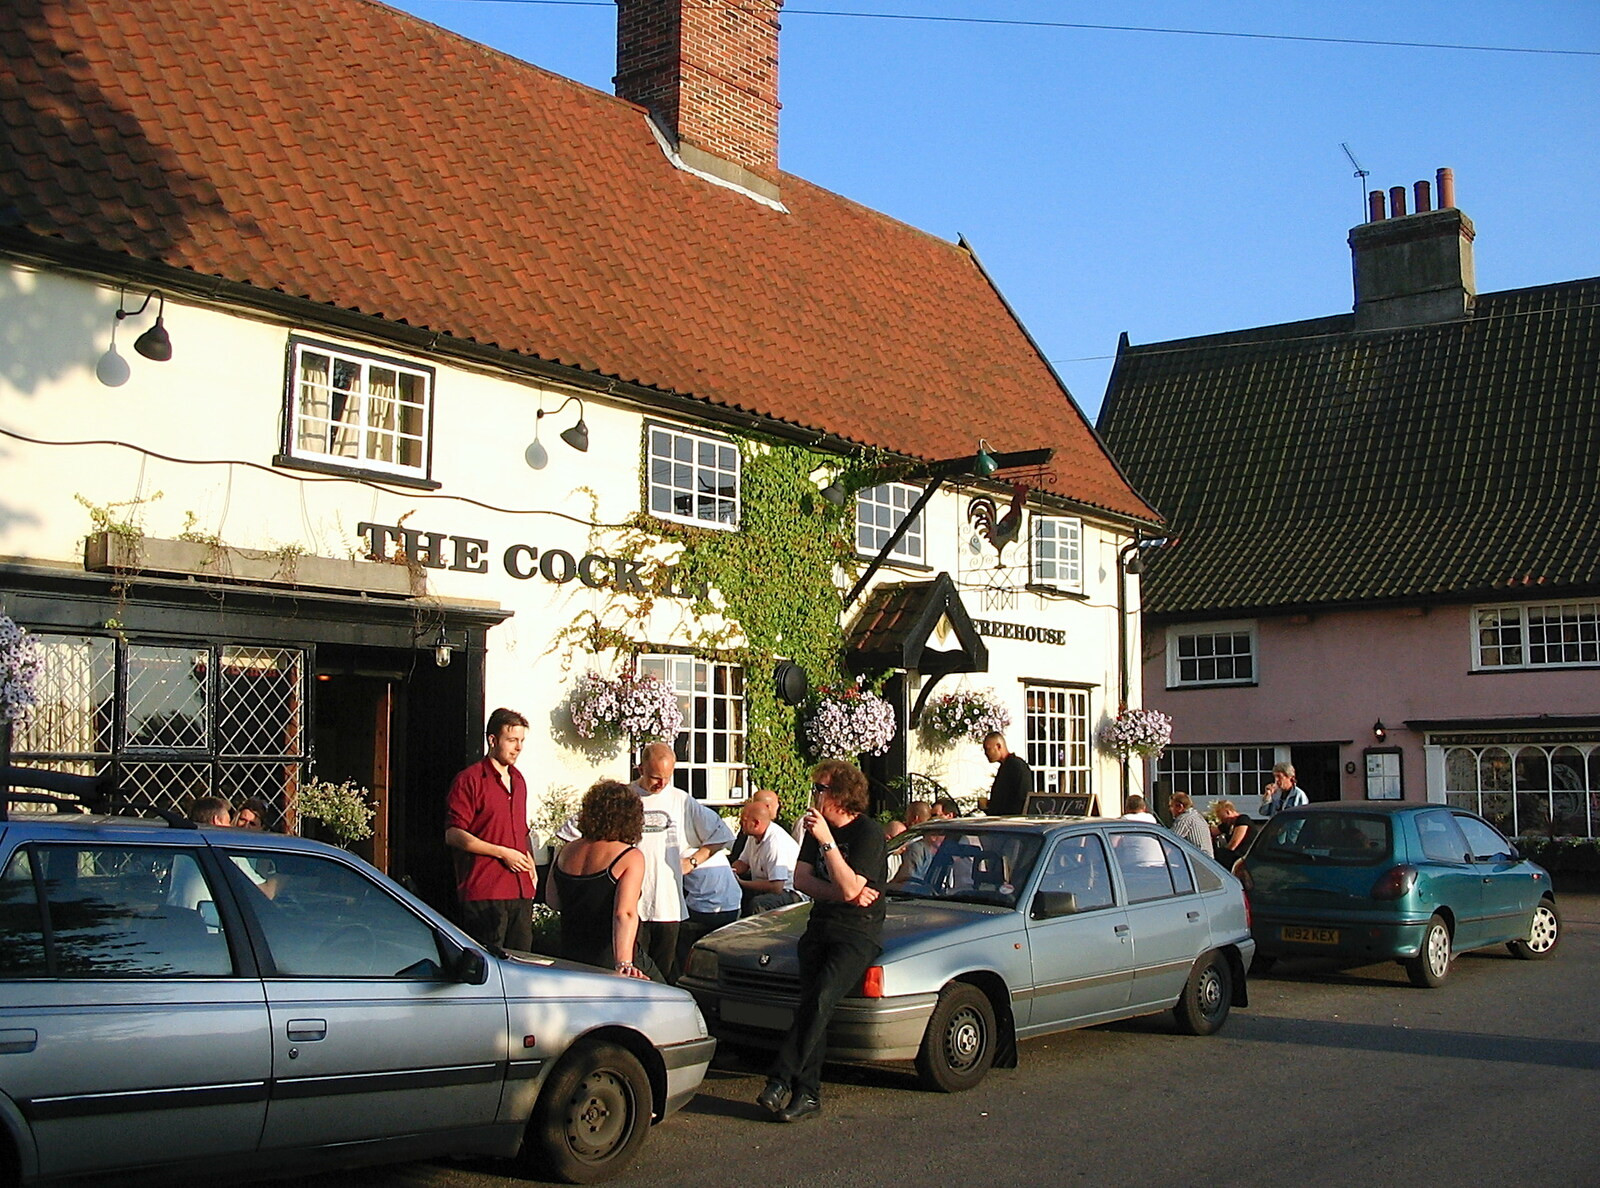 The Cock Inn, and Nosher's Vehicle A from The BBS, and the Big Skies of East Anglia, Diss and Hunston, Norfolk and Suffolk - 6th August 2005